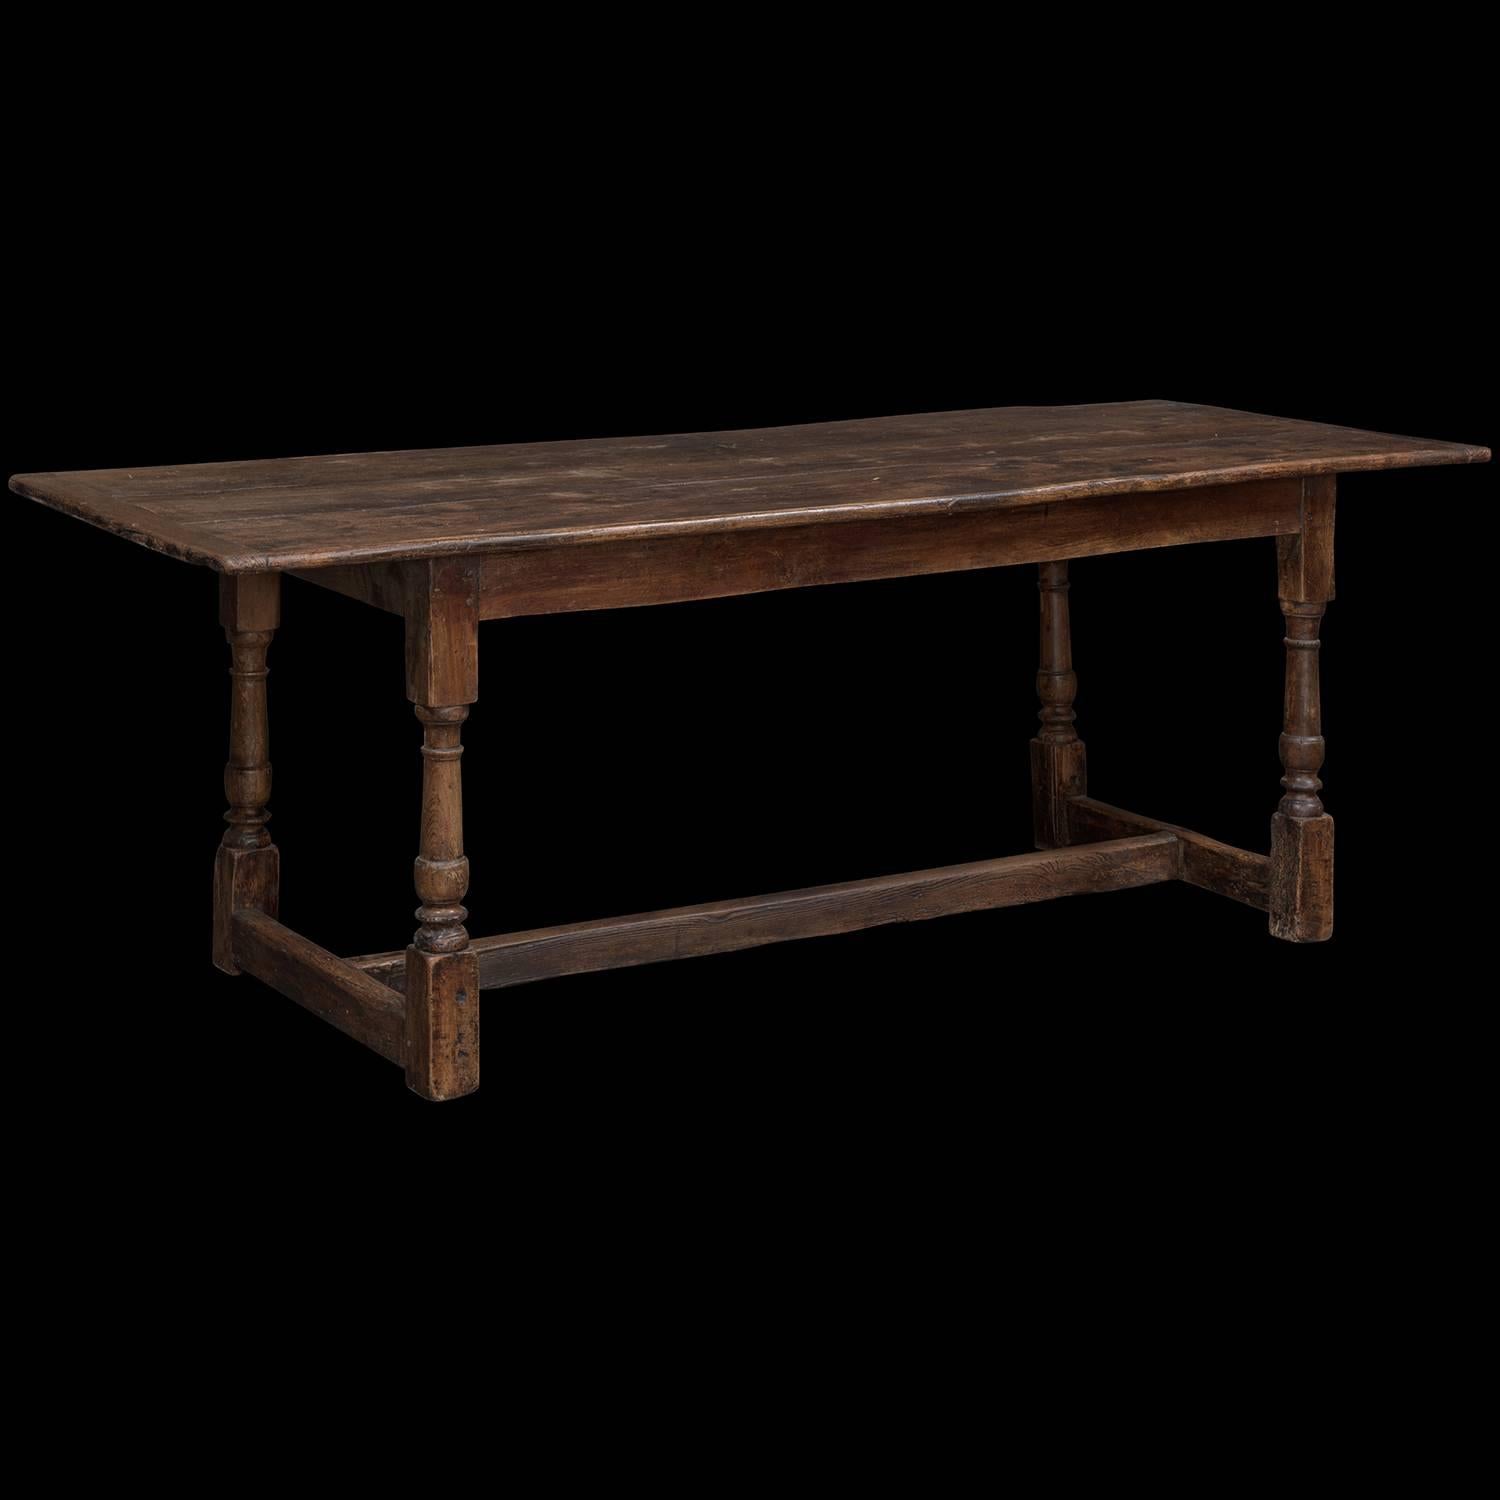 Elmwood dining table. Authentic primitive construction with turned legs and bottom stretcher.